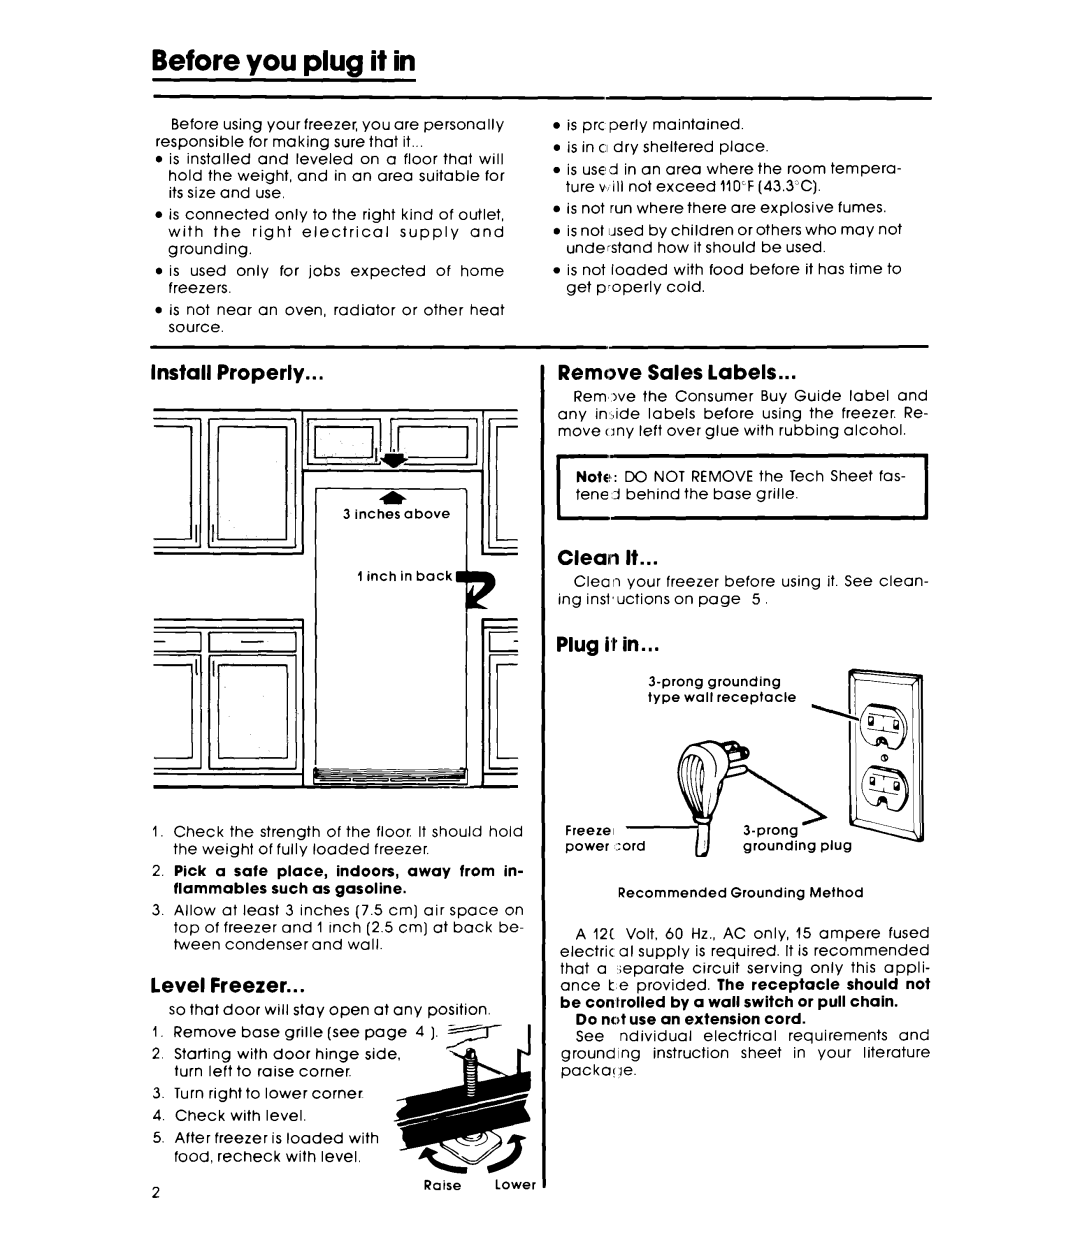 Whirlpool EVISHKXK manual Before you plug it in, Install Properly, Remove Sales labels, Plug, level Freezer, Cleaii 